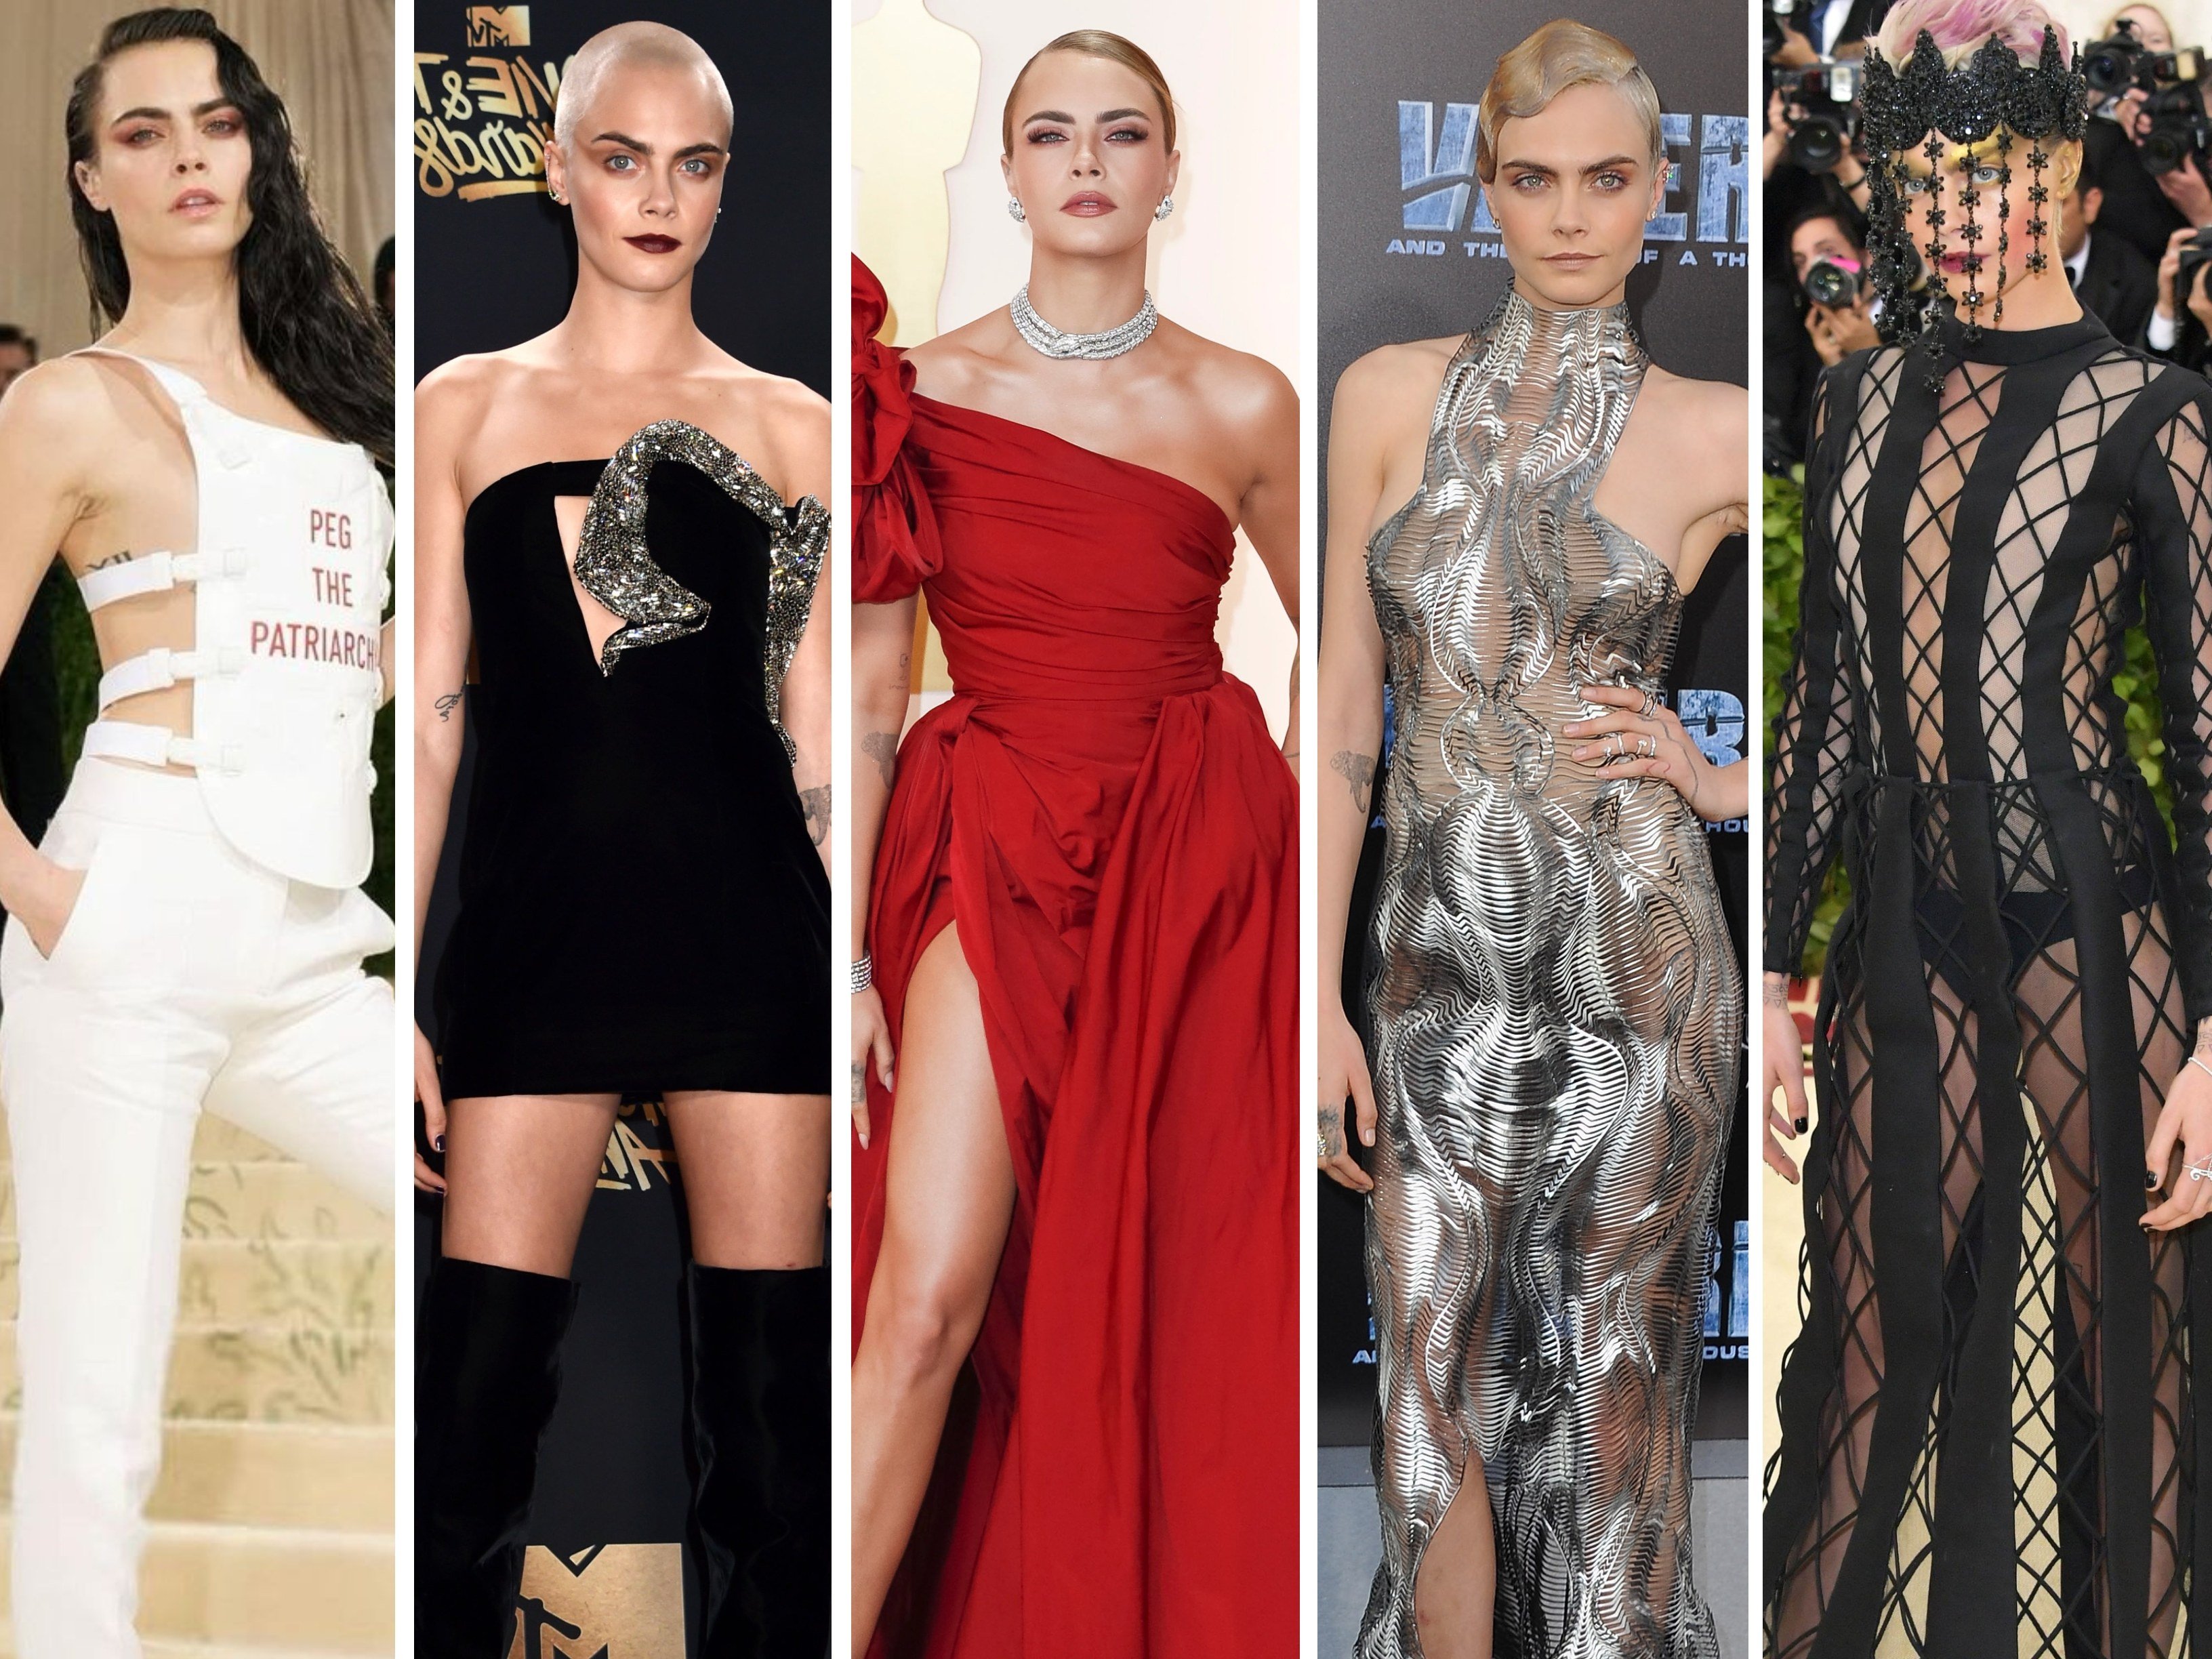 British model and actress Cara Delevingne is known for donning daring looks. Photos: Getty Images, EPA, @marielhaenn/Instagram, AFP